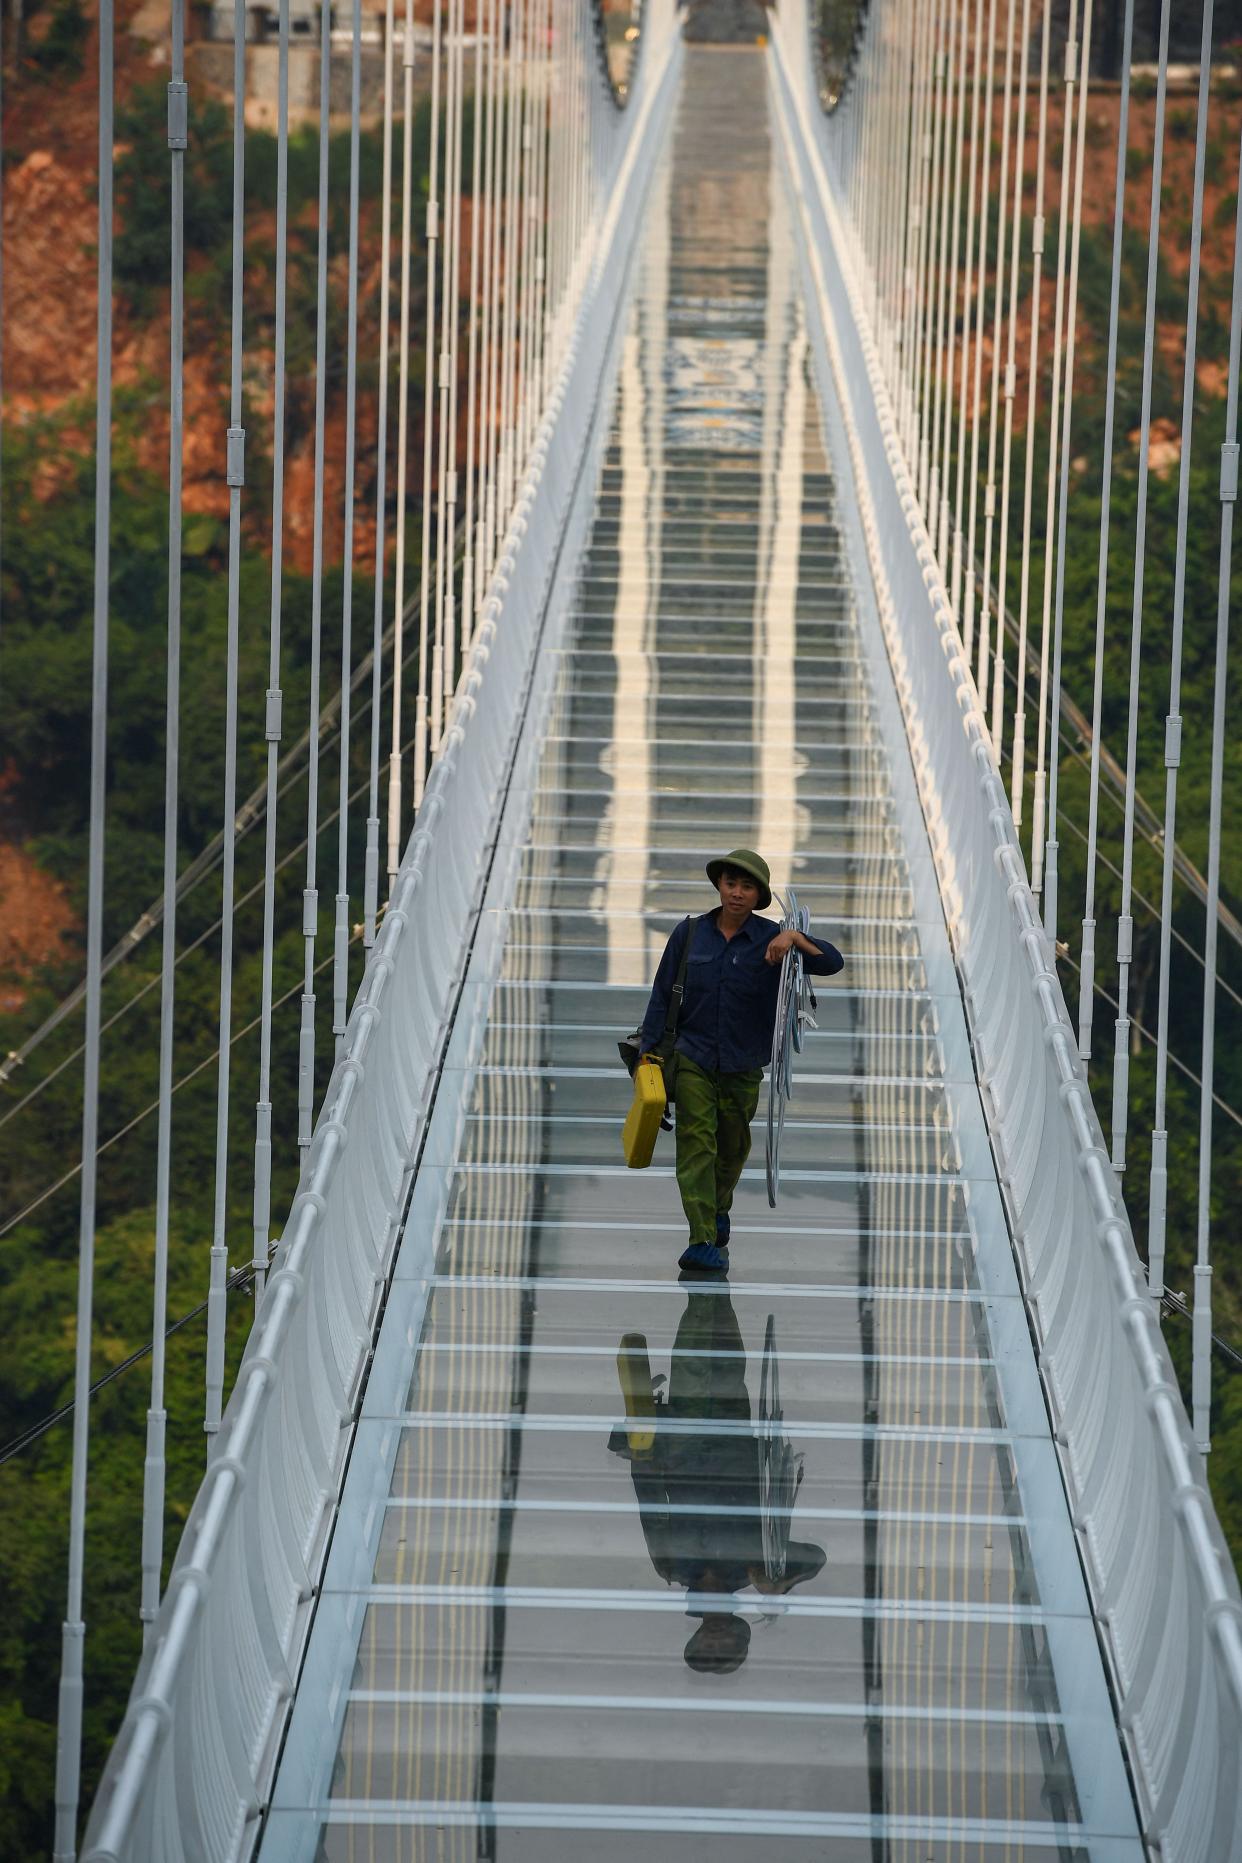 a person stands on the Bach Long glass bridge in the Moc Chau district in Vietnam's Son La province